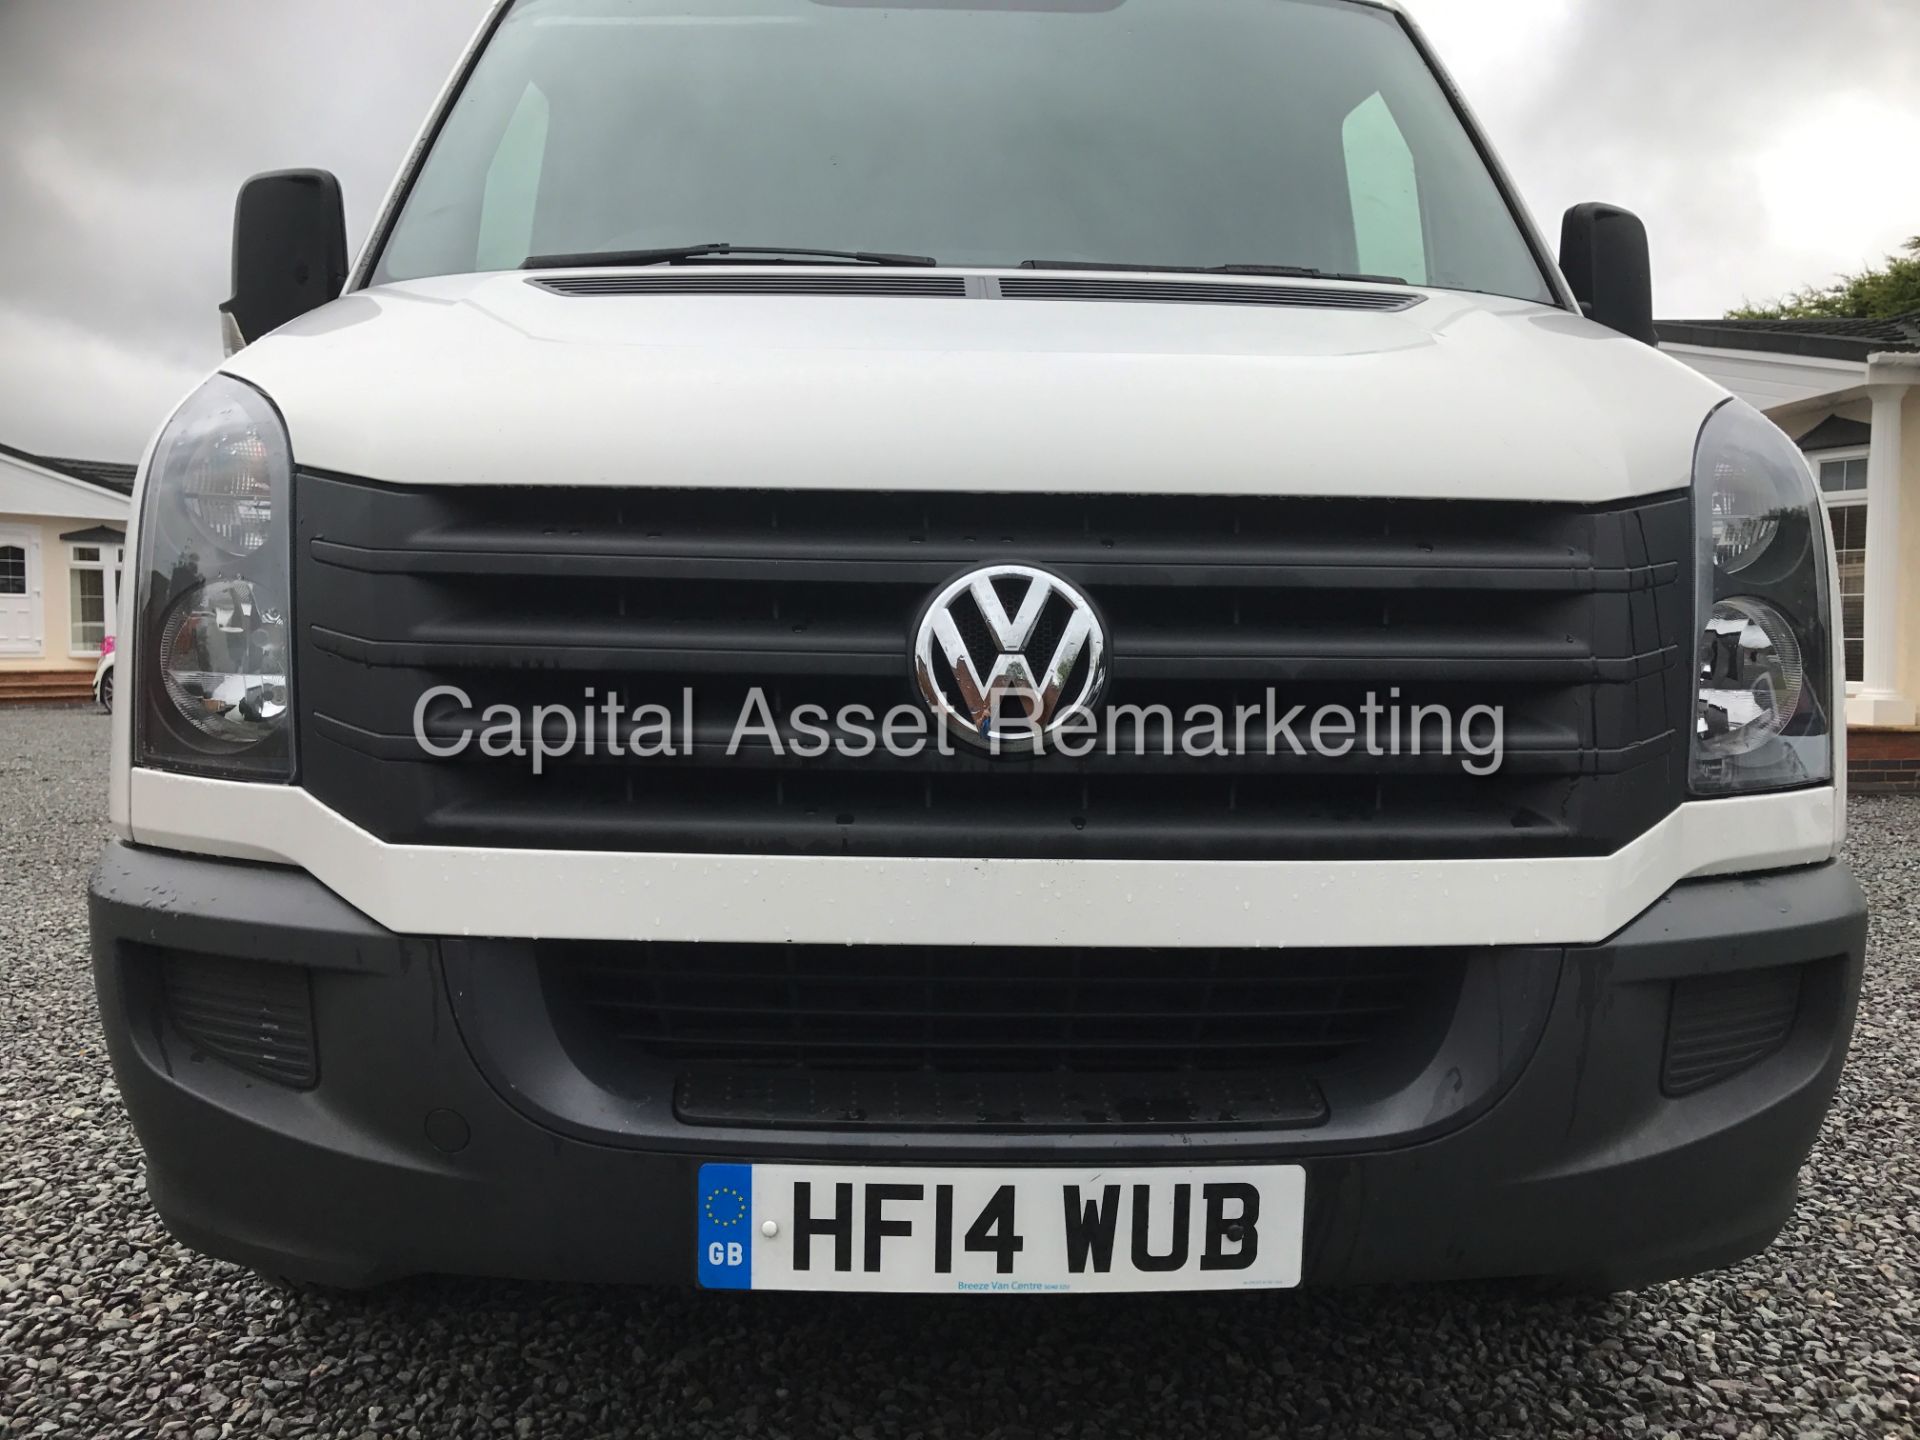 VOLKSWAGEN CRAFTER CR30 SWB 2.0TDI (109) - NEW SHAPE - 14 REG - MASSIVE SPEC - AIR CON!! - 1 OWNER! - Image 2 of 13